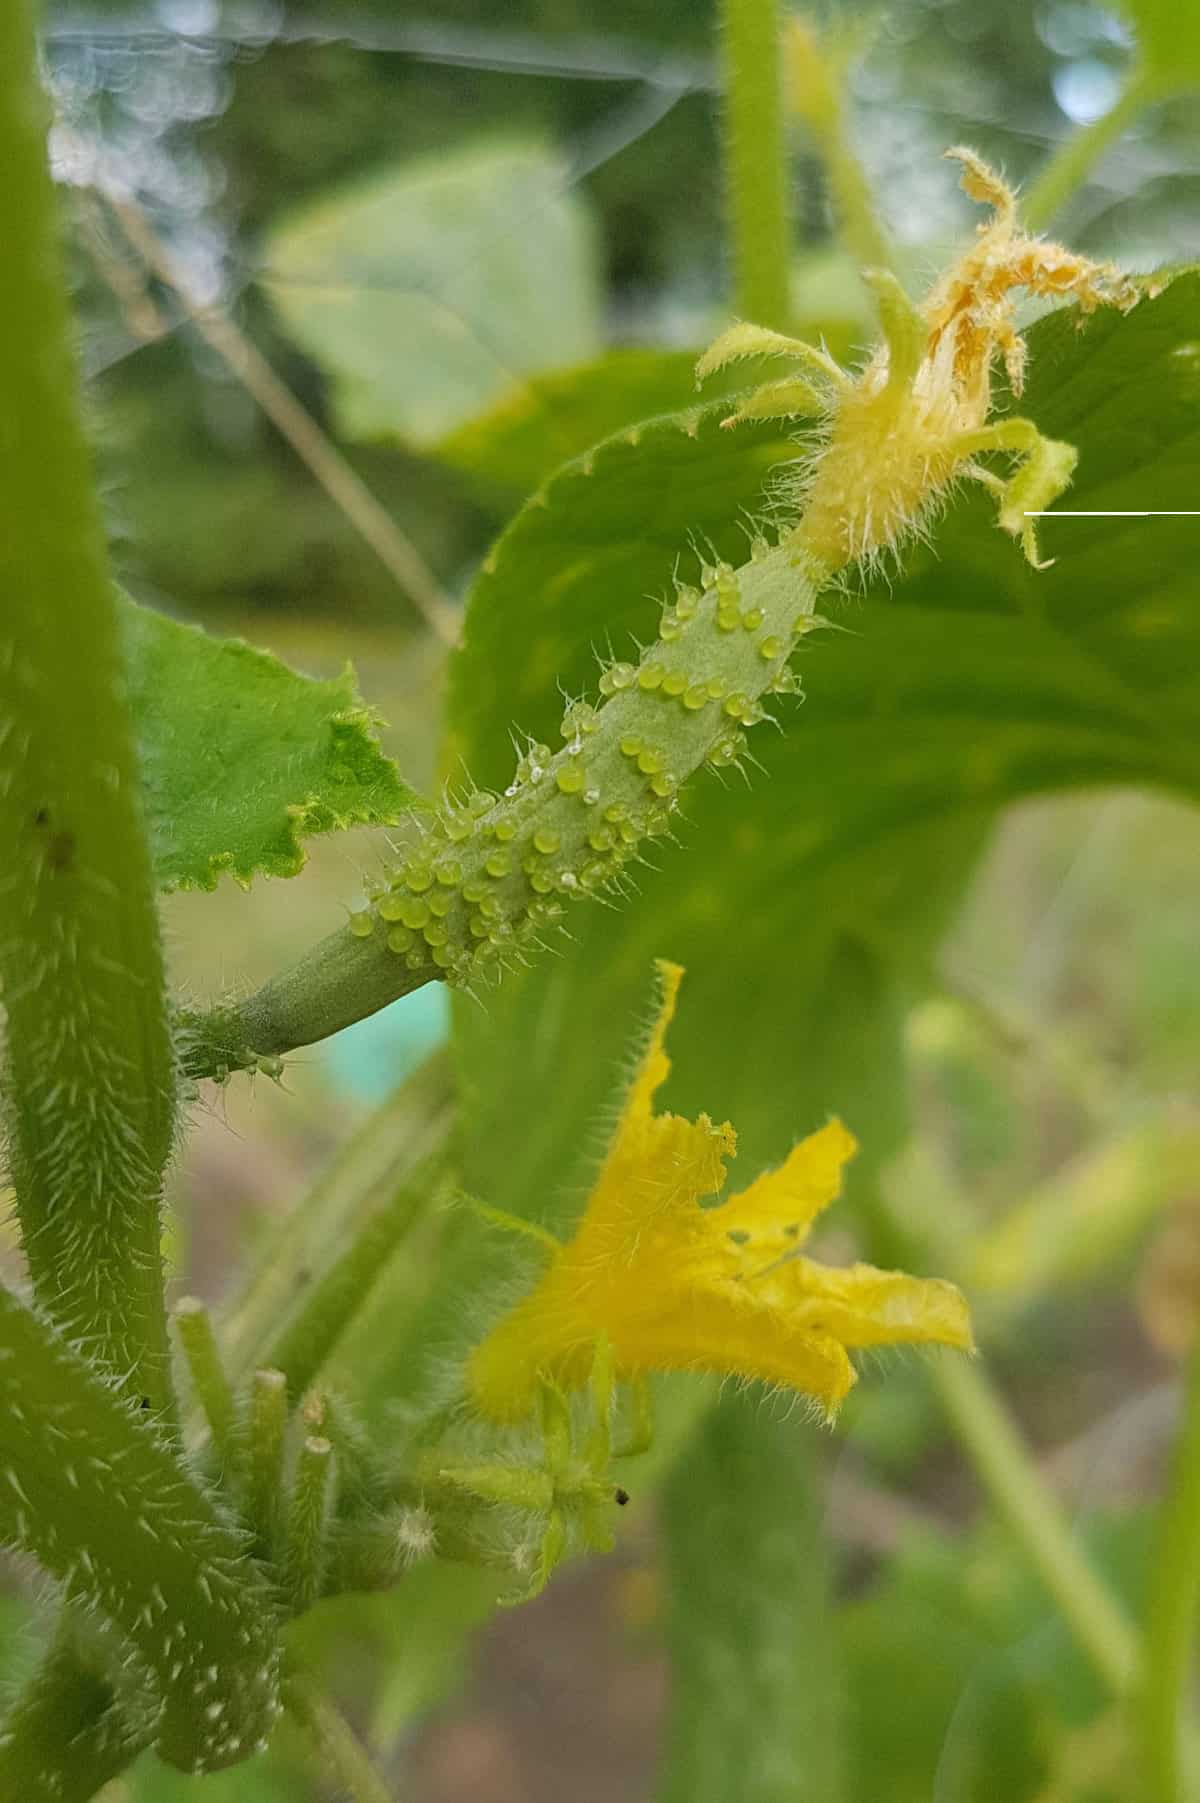 Close up of a baby cucumber on the vine with yellow flower still attached.